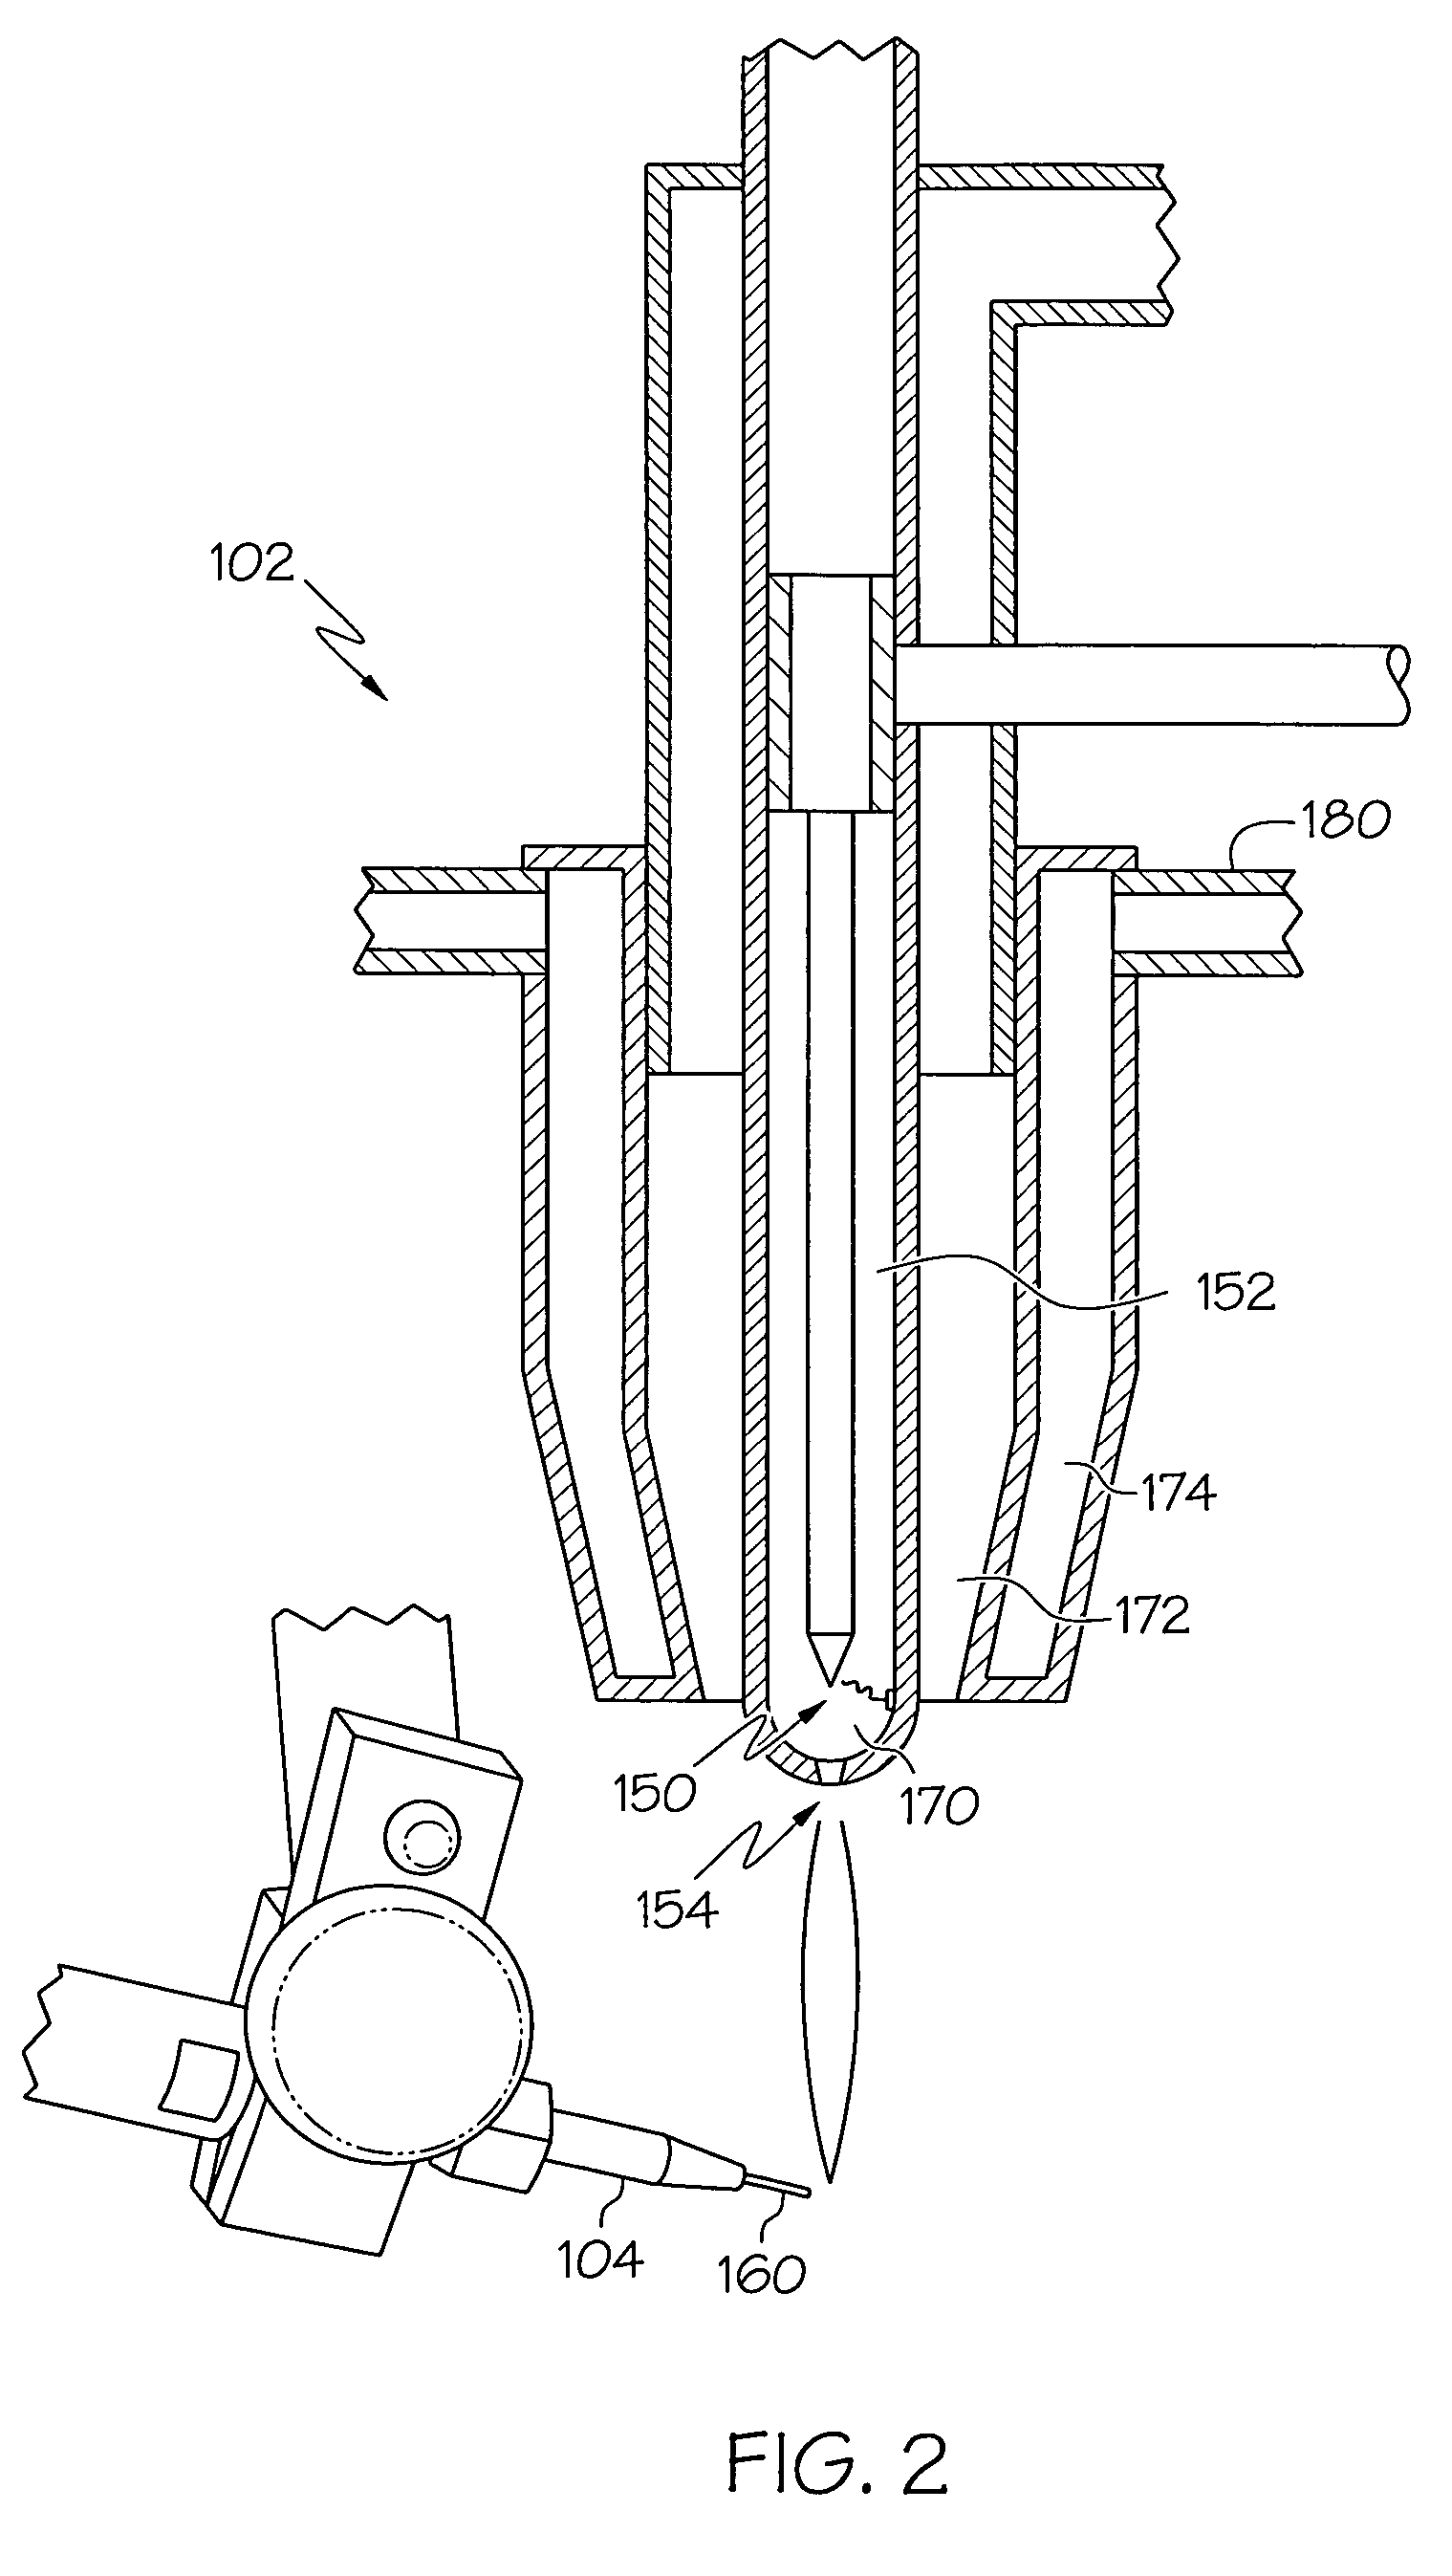 Solid-free-form fabrication process and apparatus including in-process workpiece cooling